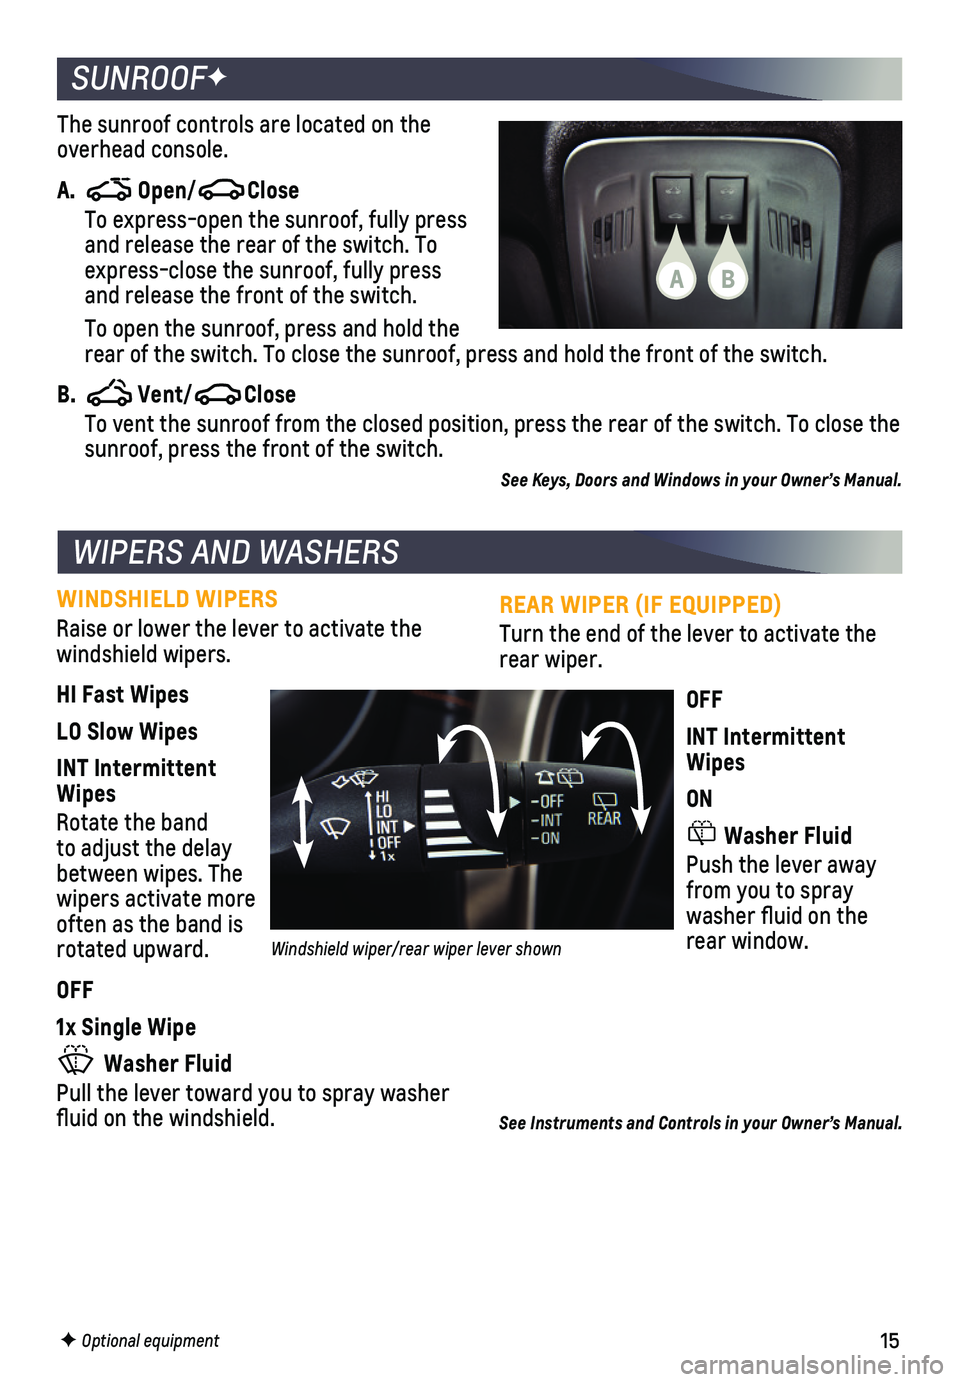 CHEVROLET CRUZE 2018  Get To Know Guide 15
REAR WIPER (IF EQUIPPED)
Turn the end of the lever to activate the rear wiper.
OFF
INT Intermittent Wipes
ON
 Washer Fluid
Push the lever away from you to spray washer fluid on the rear window.
WIN